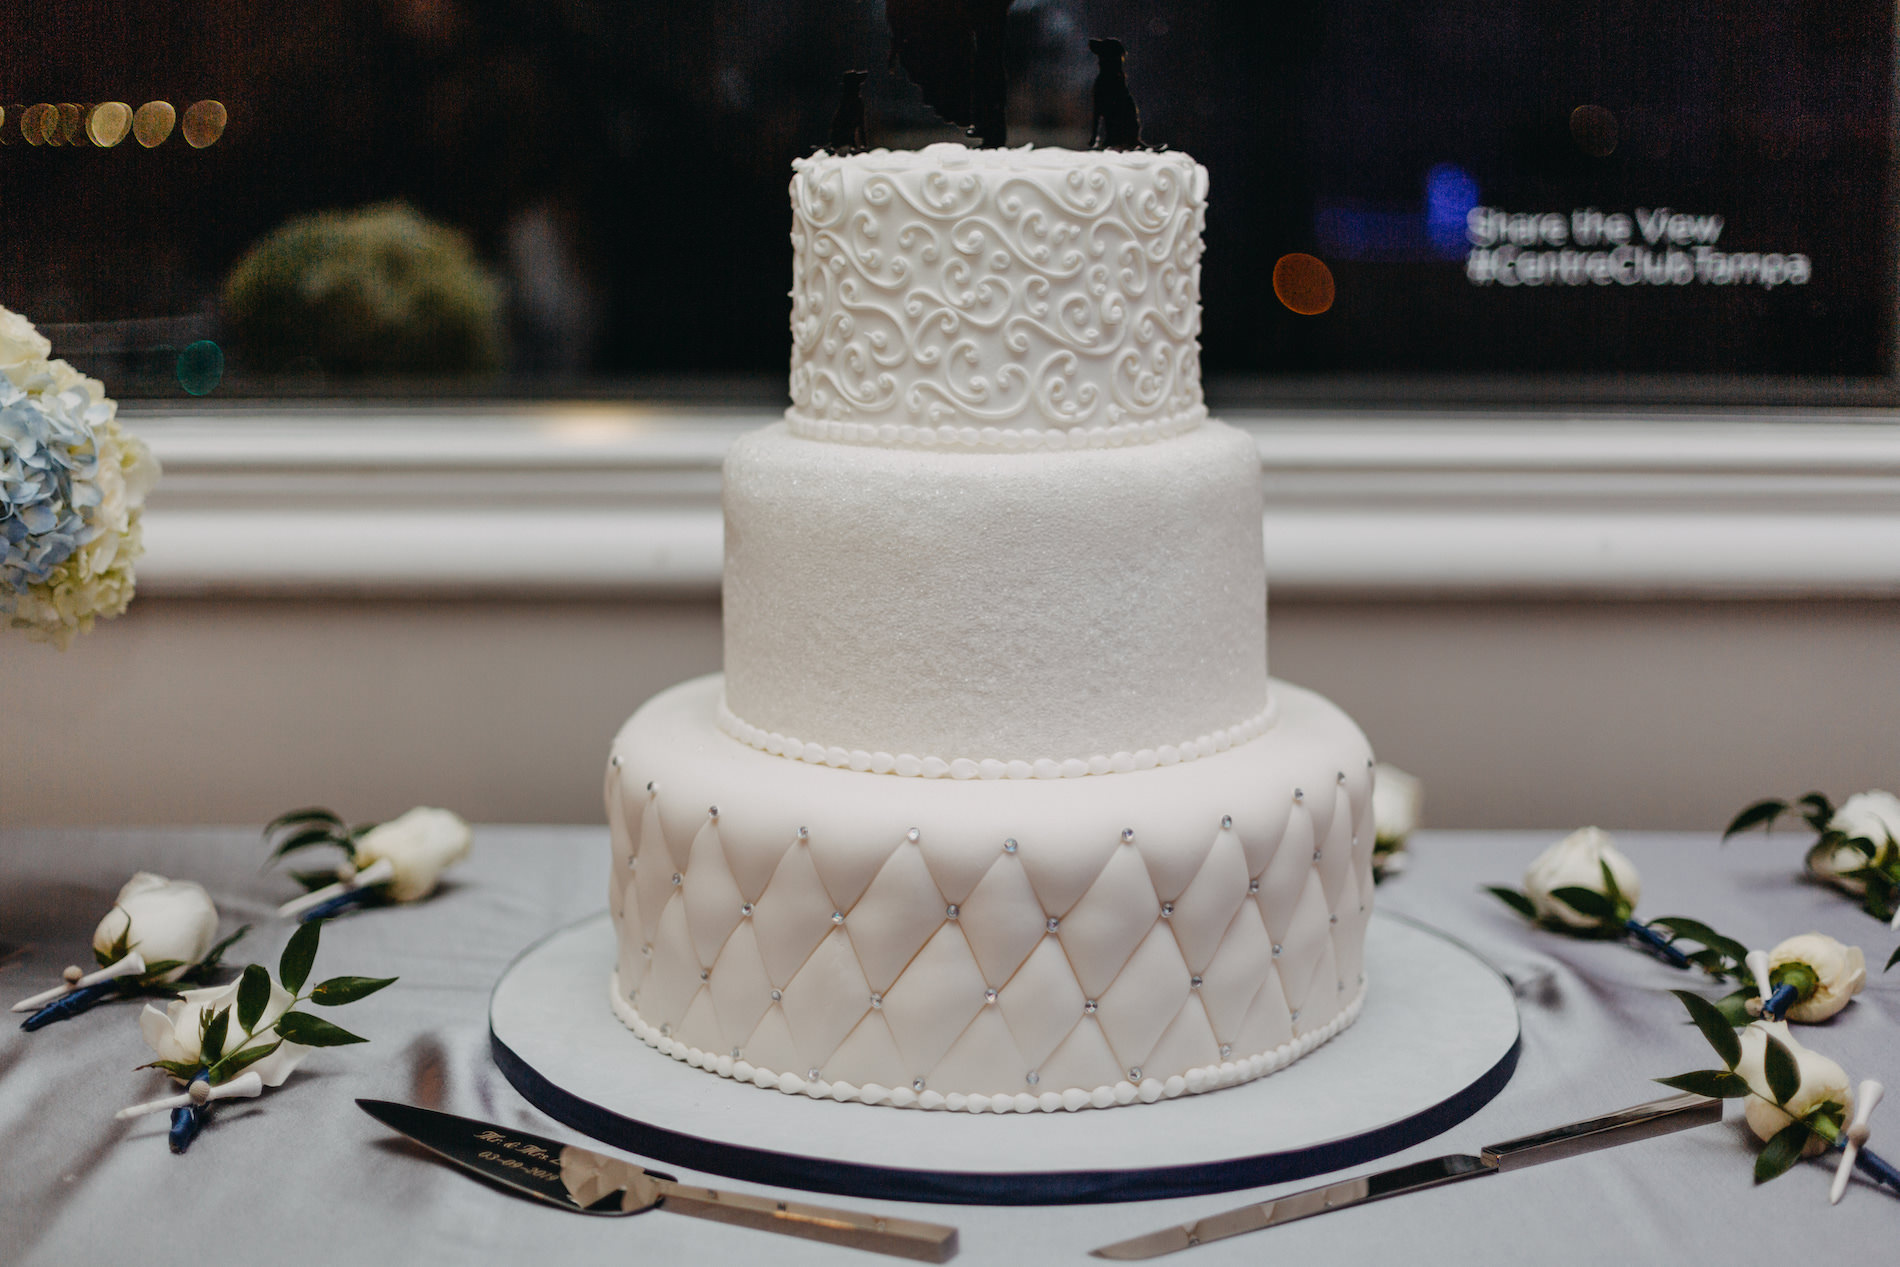 Classic White Three Tier Wedding Cake with Quilted Design and Rhinestone Embellishments and Swirl Frosted Design | Tampa Bay Wedding Cake Alessi Bakery